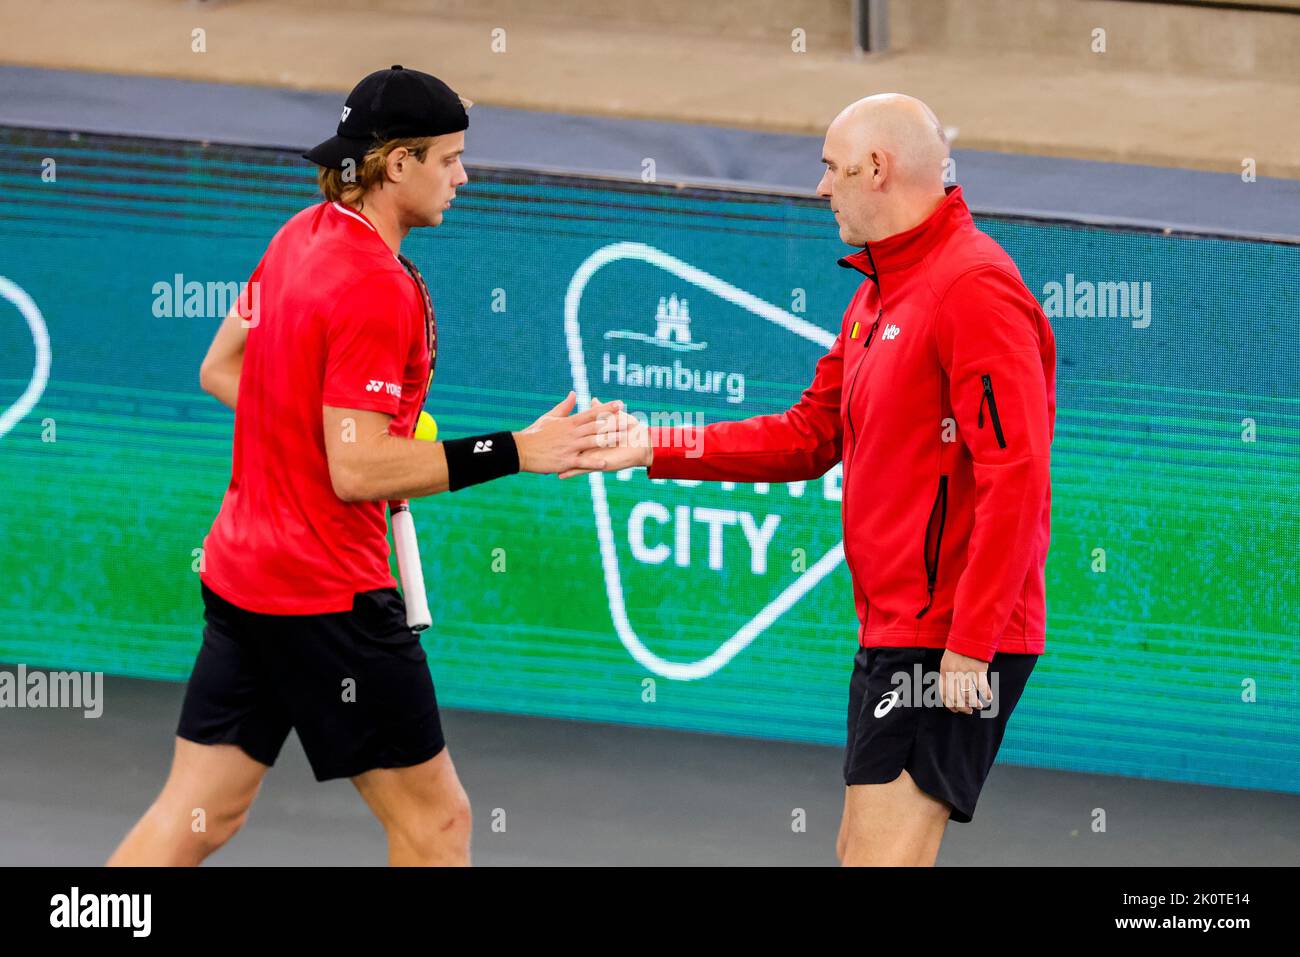 Hamburg, Germany, 13th Sep, 2022. Belgian Zizou Bergs (L) shakes hands with Johan Van Herck during the group stage match between Belgium and Australia at the 2022 Davis Cup finals in Hamburg, Germany. Photo credit: Frank Molter/Alamy Live news Stock Photo